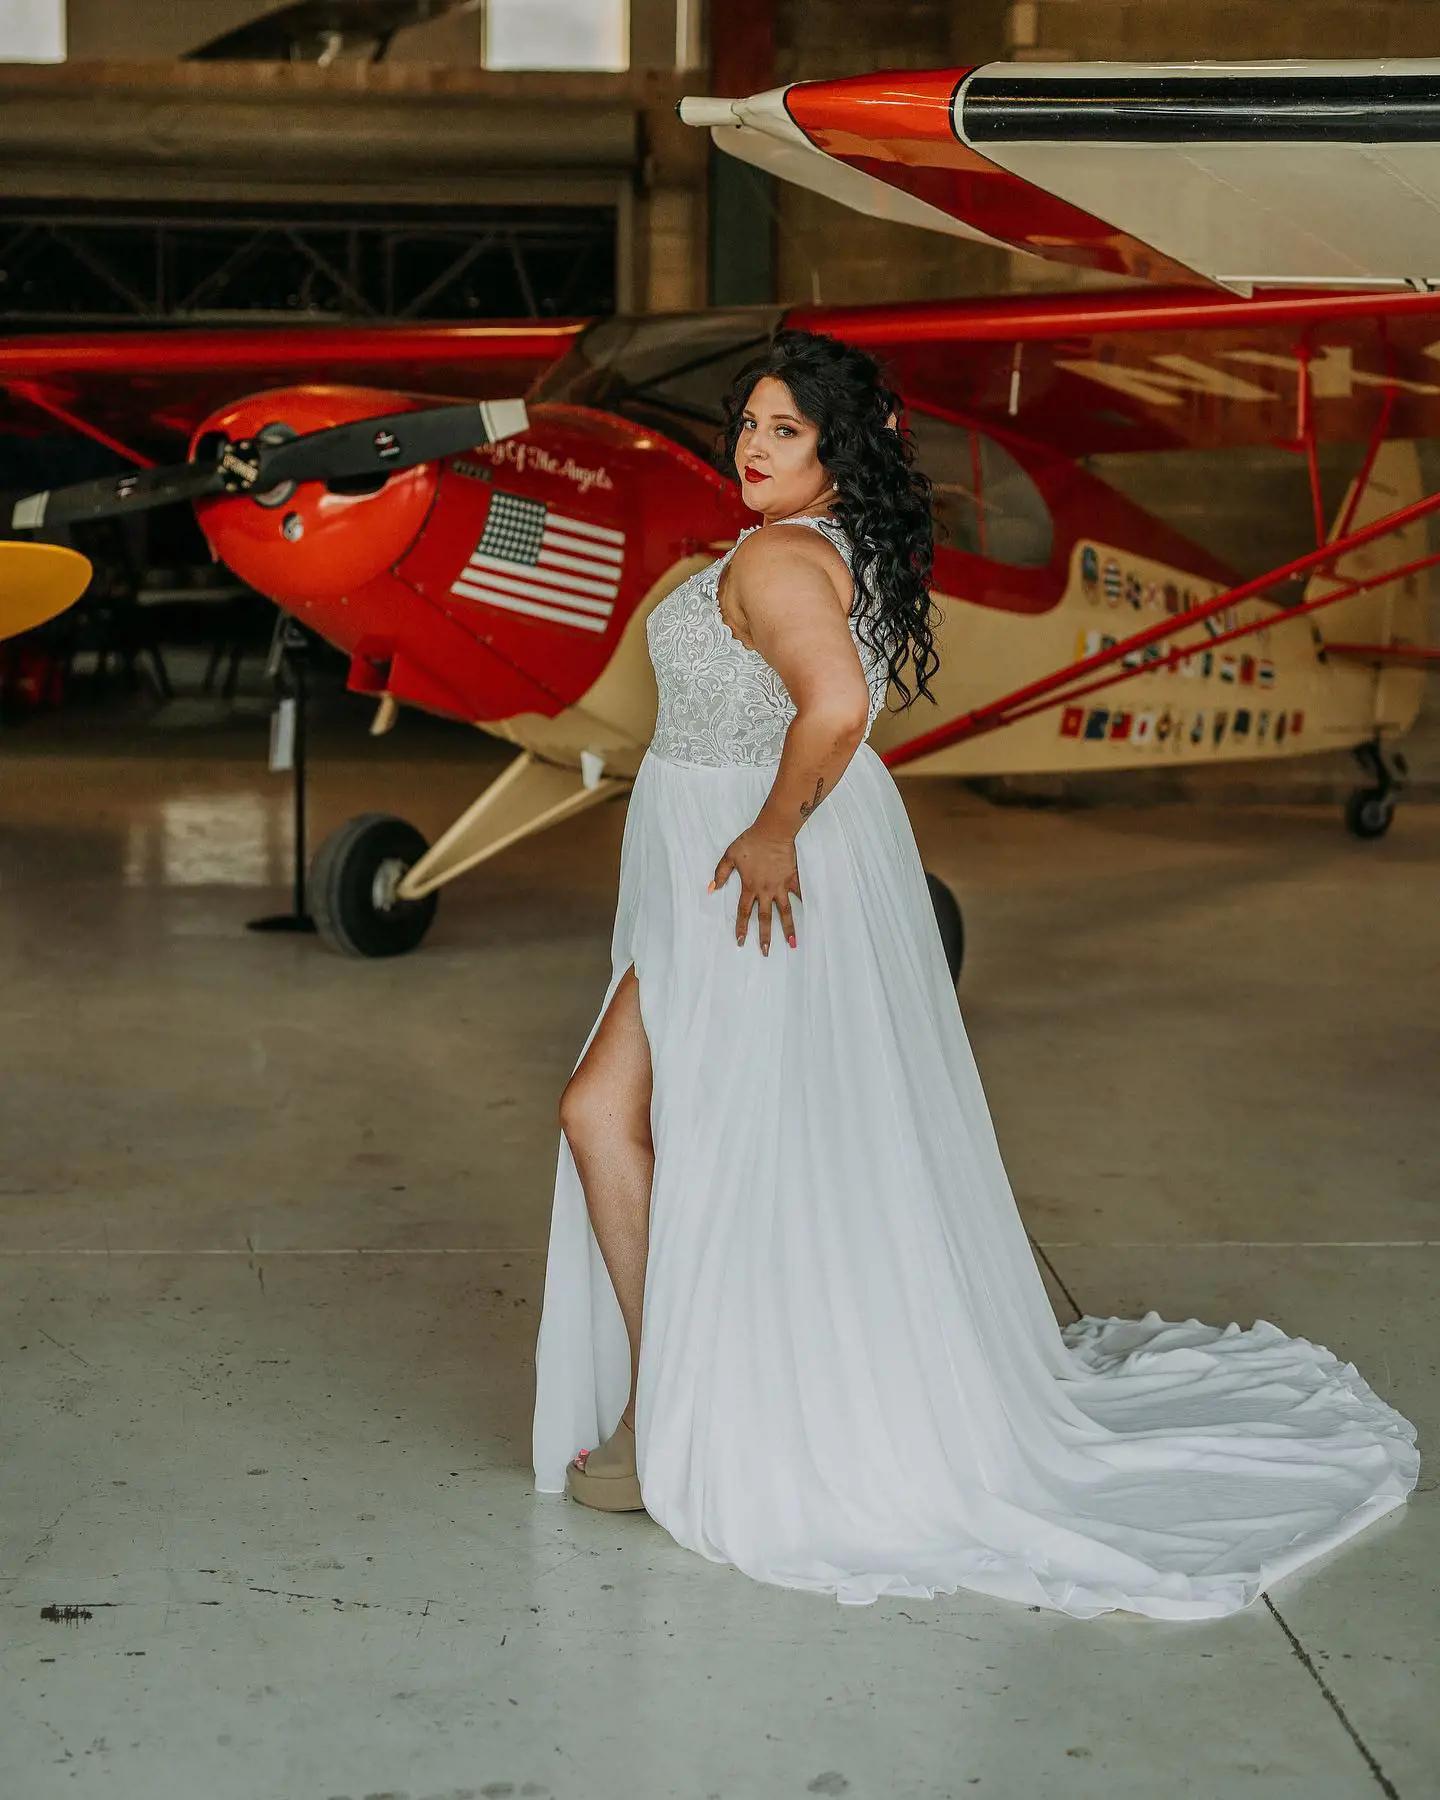 Model wearing a white gown near the airplane 4